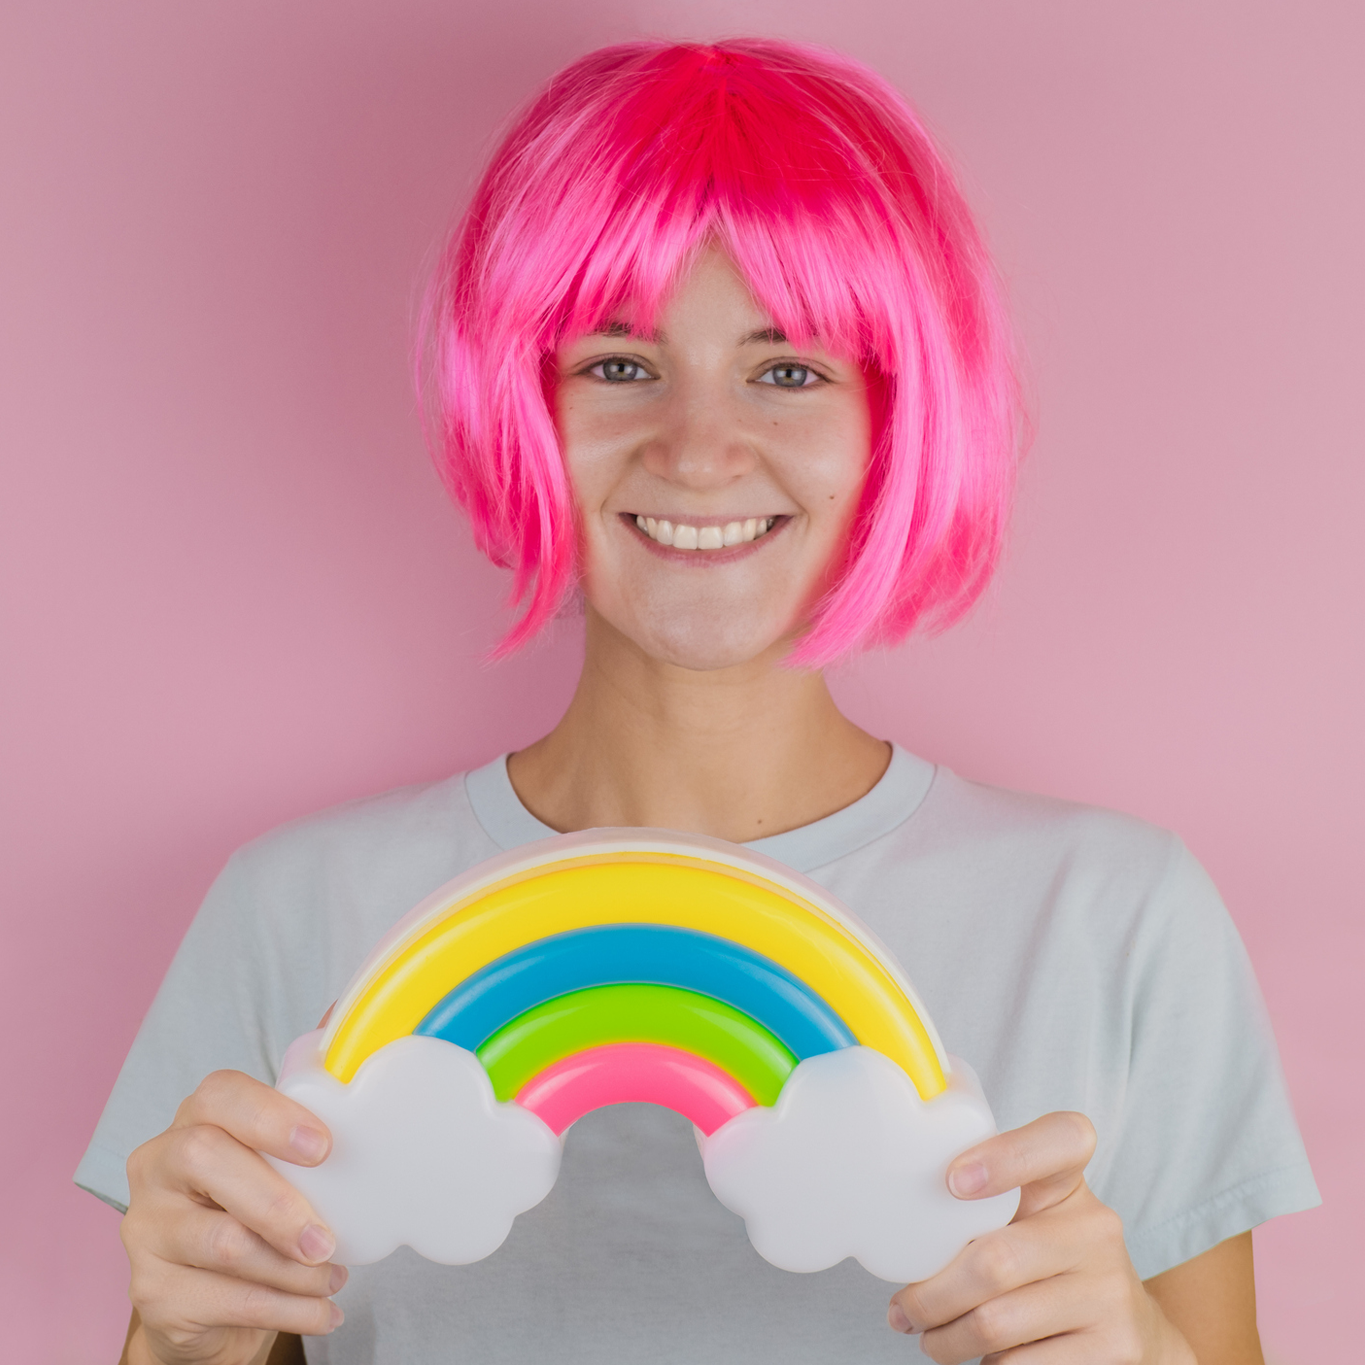 beautiful-smiling-happy-woman-with-pink-hair-holding-plastic-rainbow-picture-id1223549904